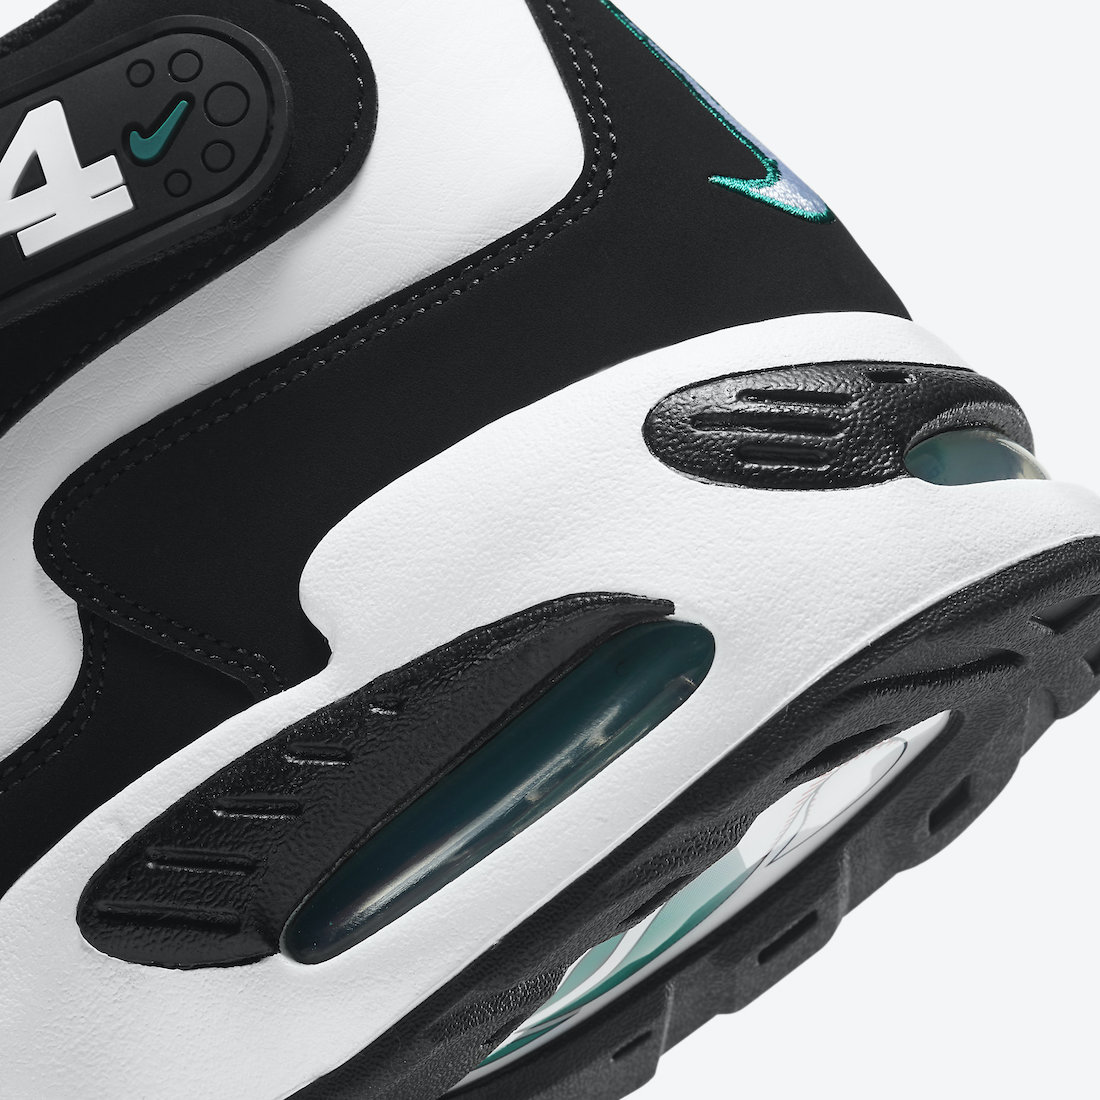 Nike-Air-Griffey-Max-1-Freshwater-DD8558-100-2021-Release-Date-7